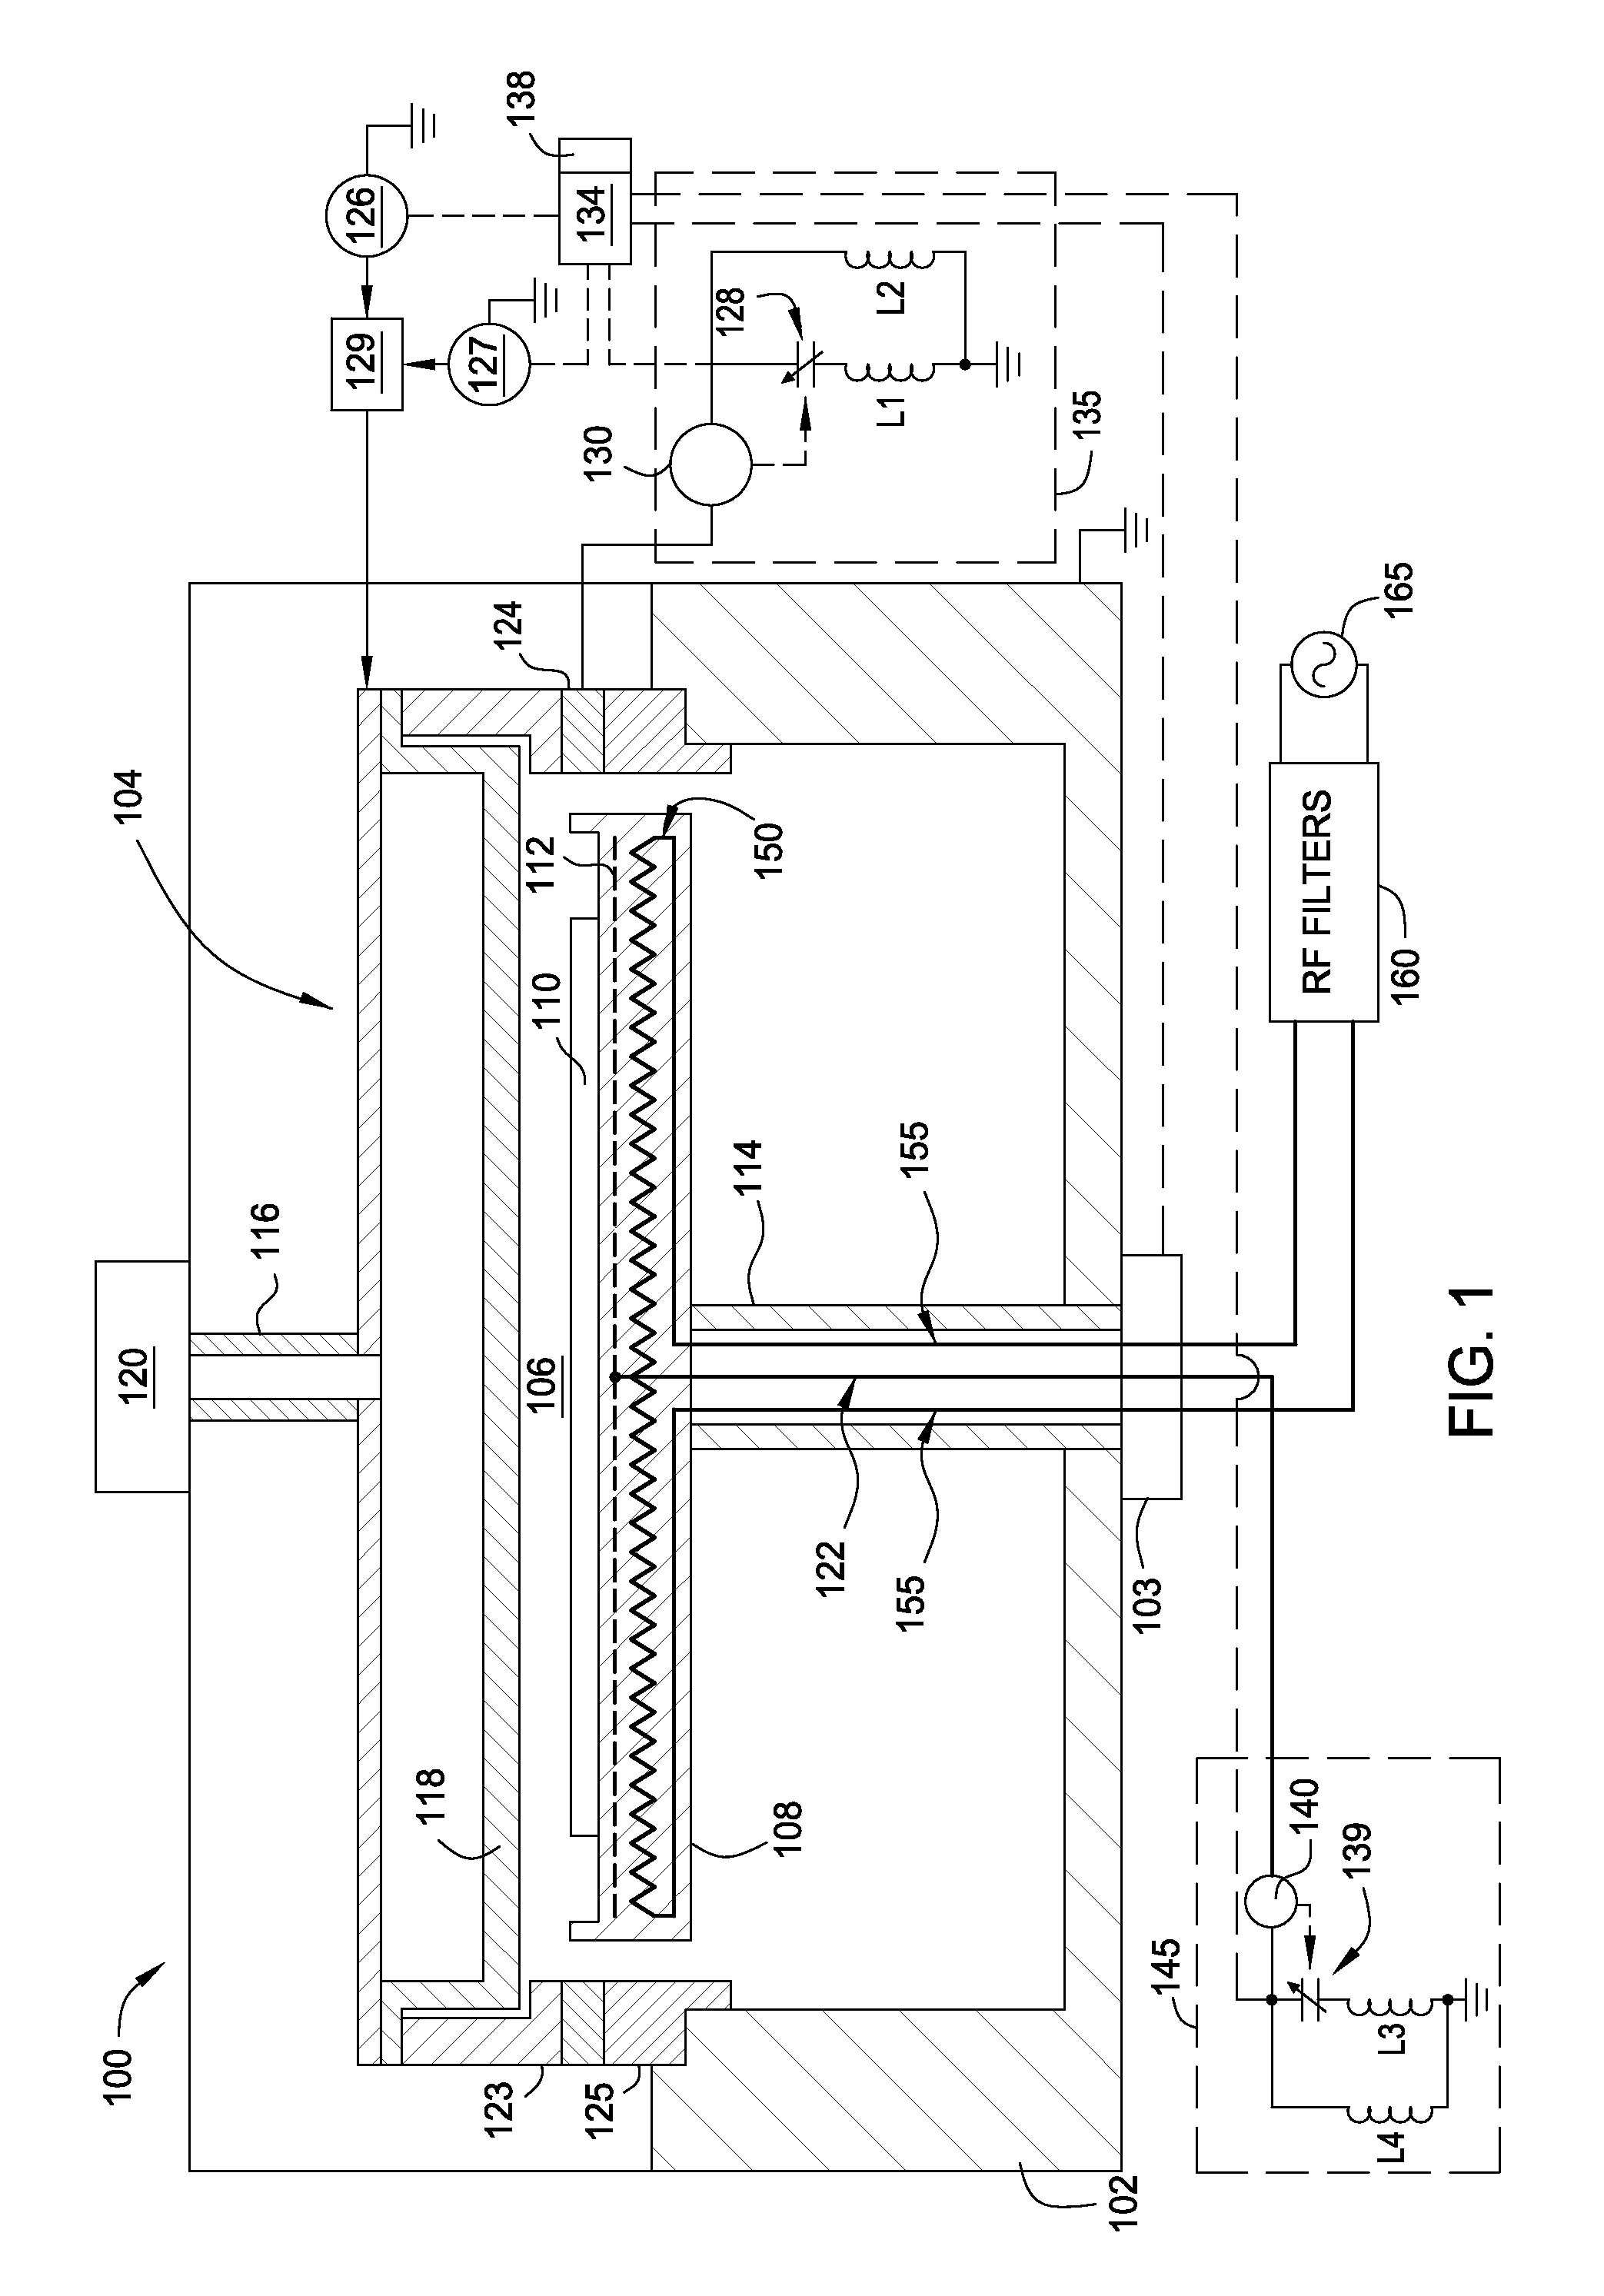 High impedance RF filter for heater with impedance tuning device